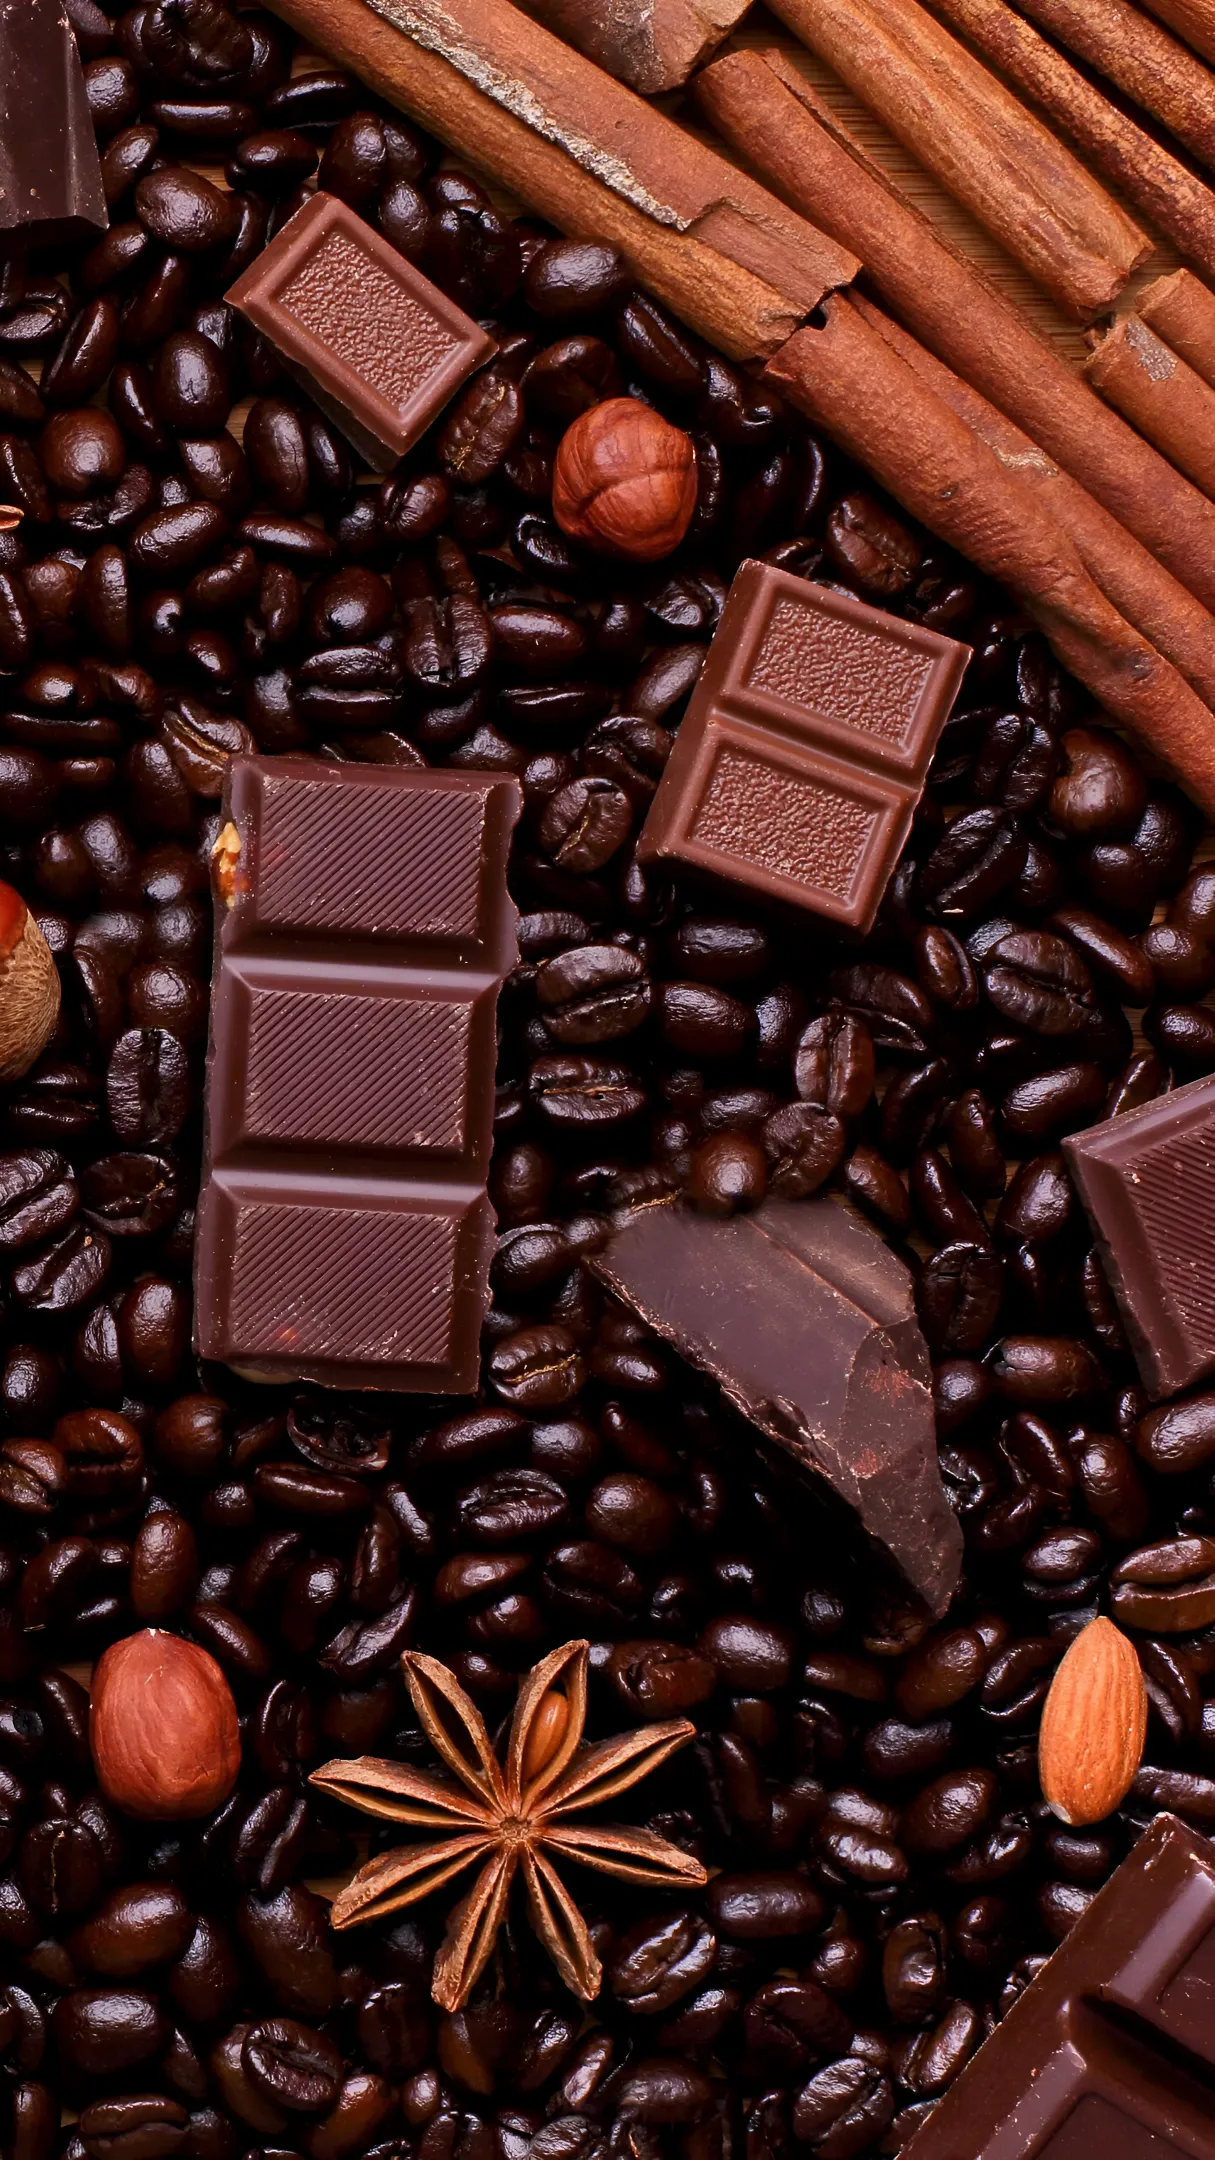 thumb for Chocolate And Coffee Seeds Wallpaper